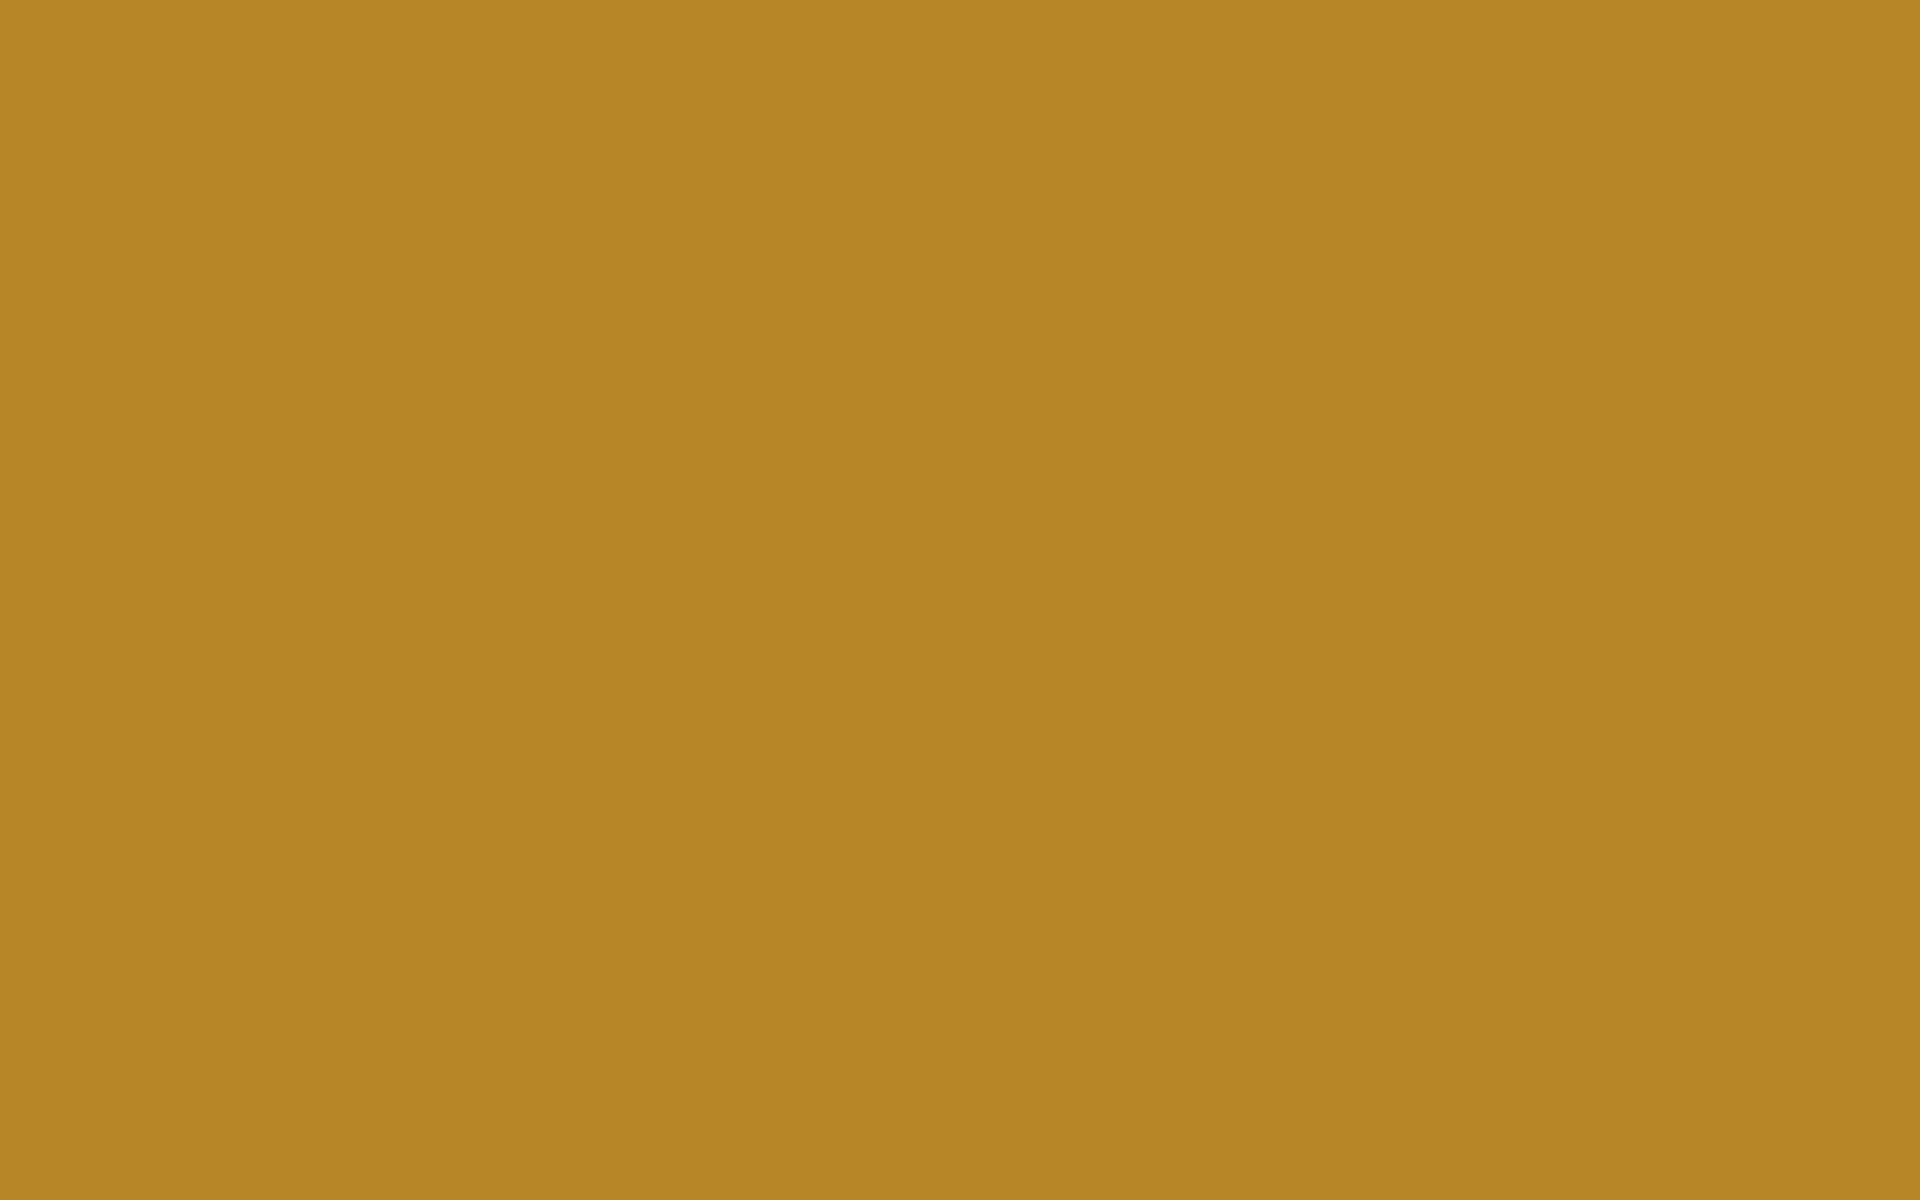 1920x1200 University Of California Gold Solid Color Background